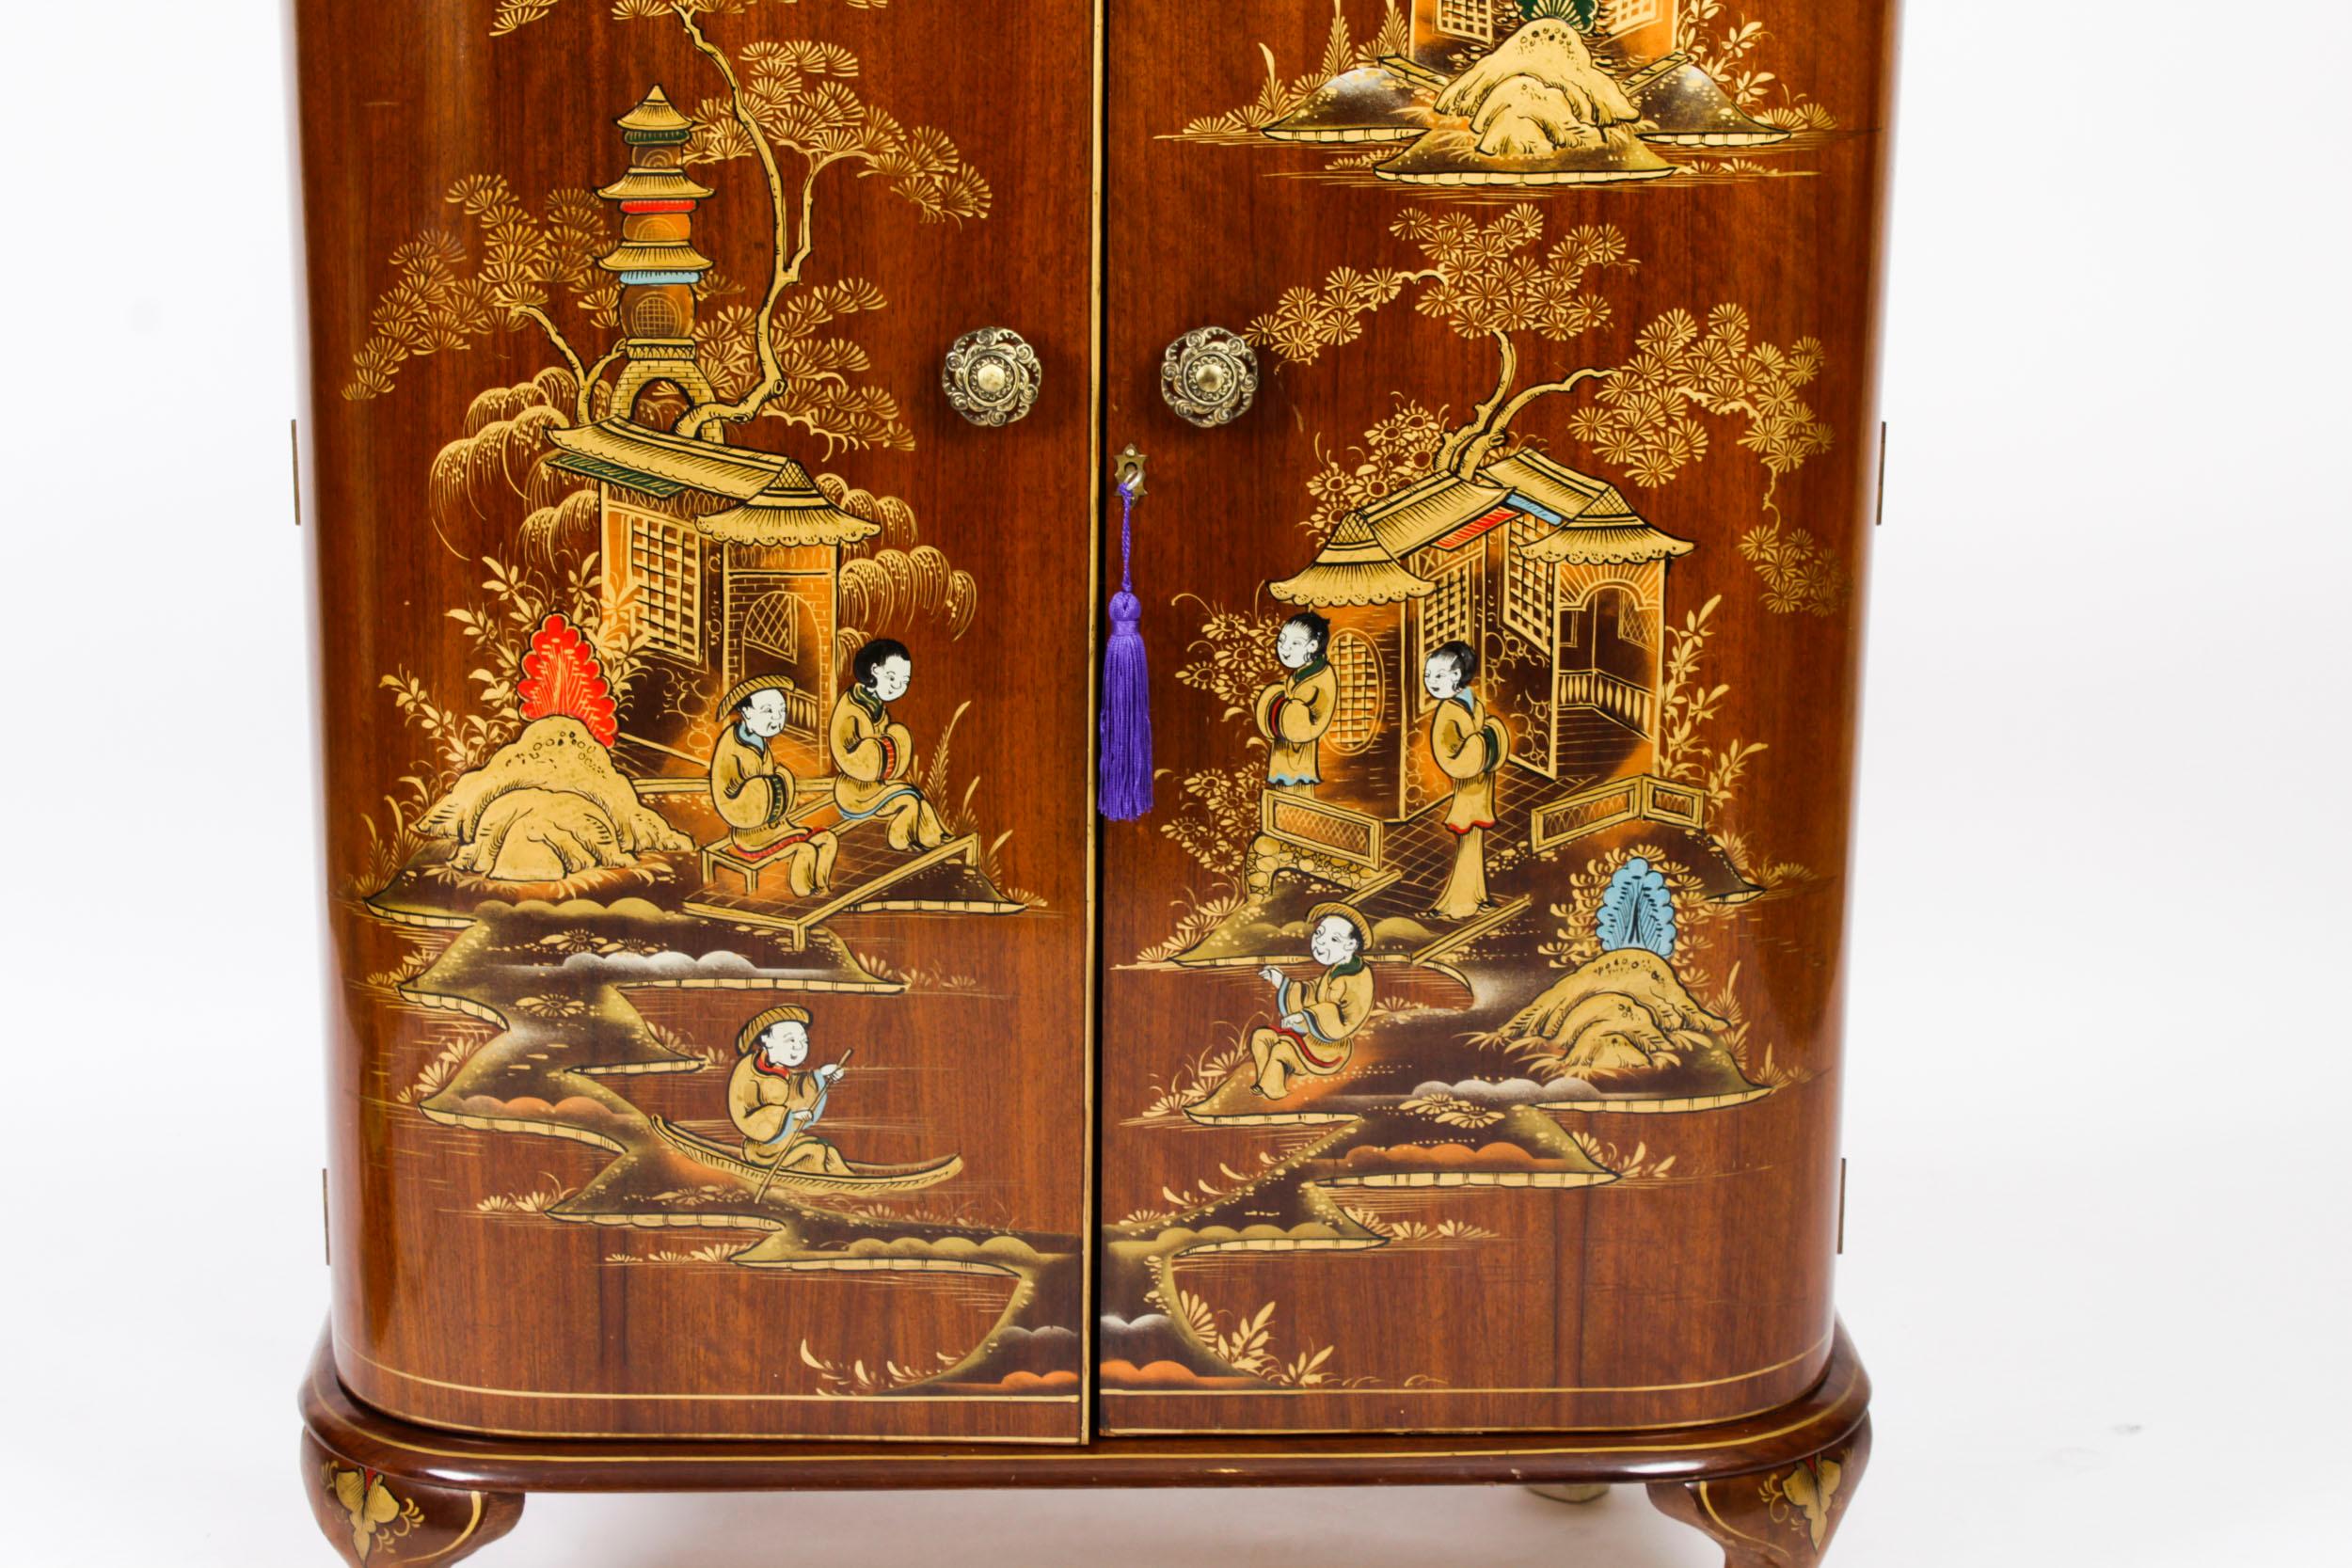 Walnut Antique Art Deco Chinoiserie Cocktail Cabinet Dry Bar Harrods Early 20th Century